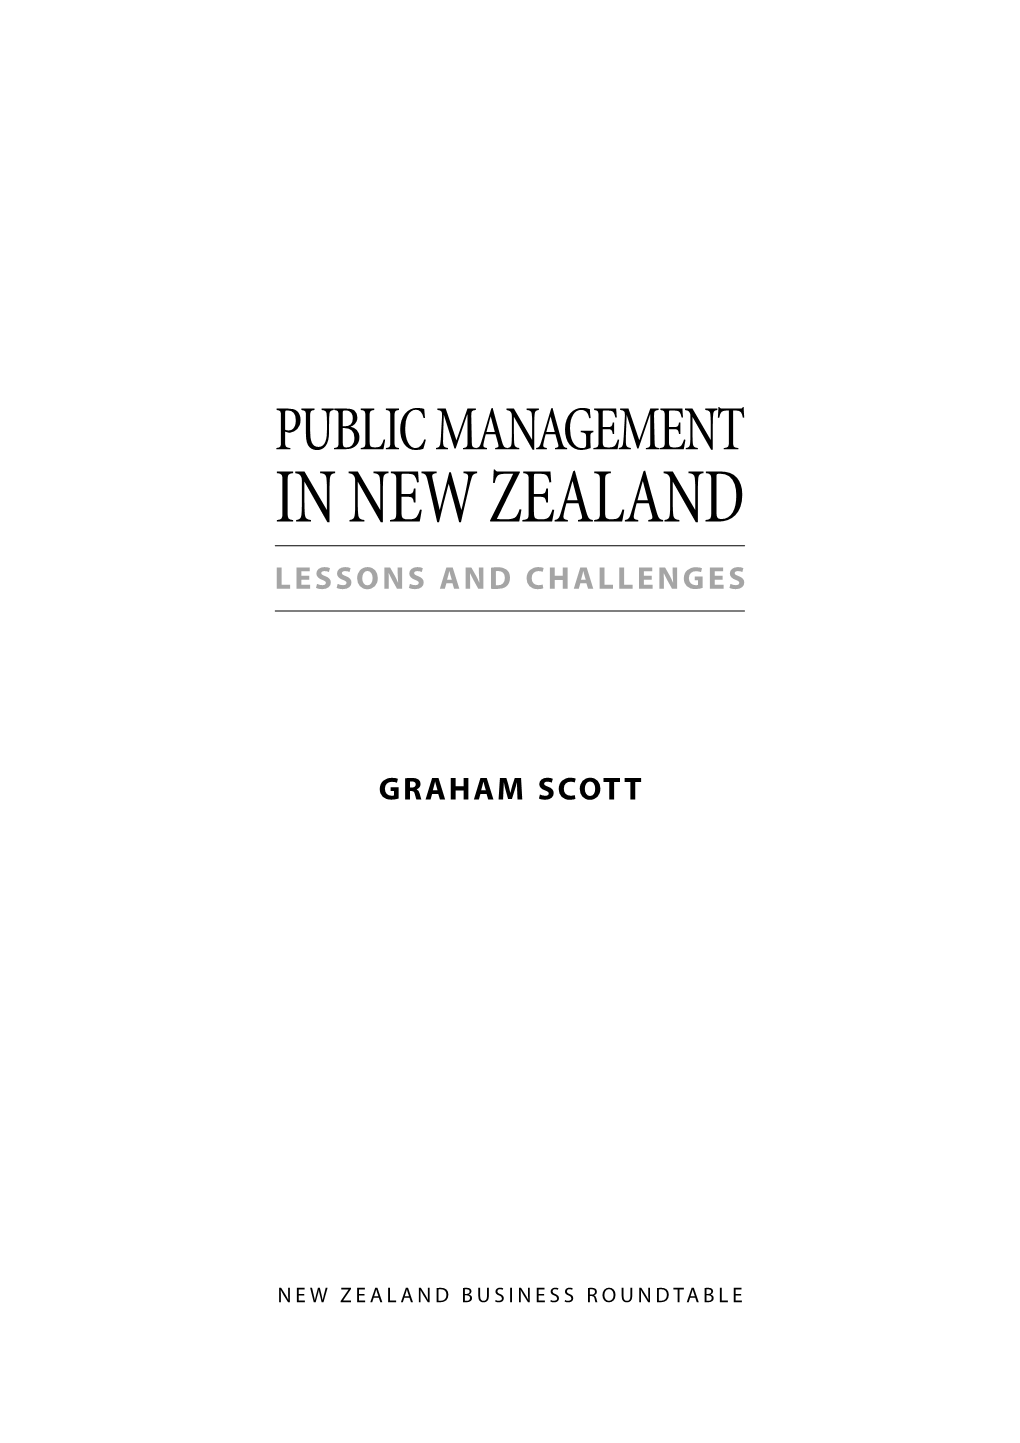 Public Management in New Zealand Lessons and Challenges